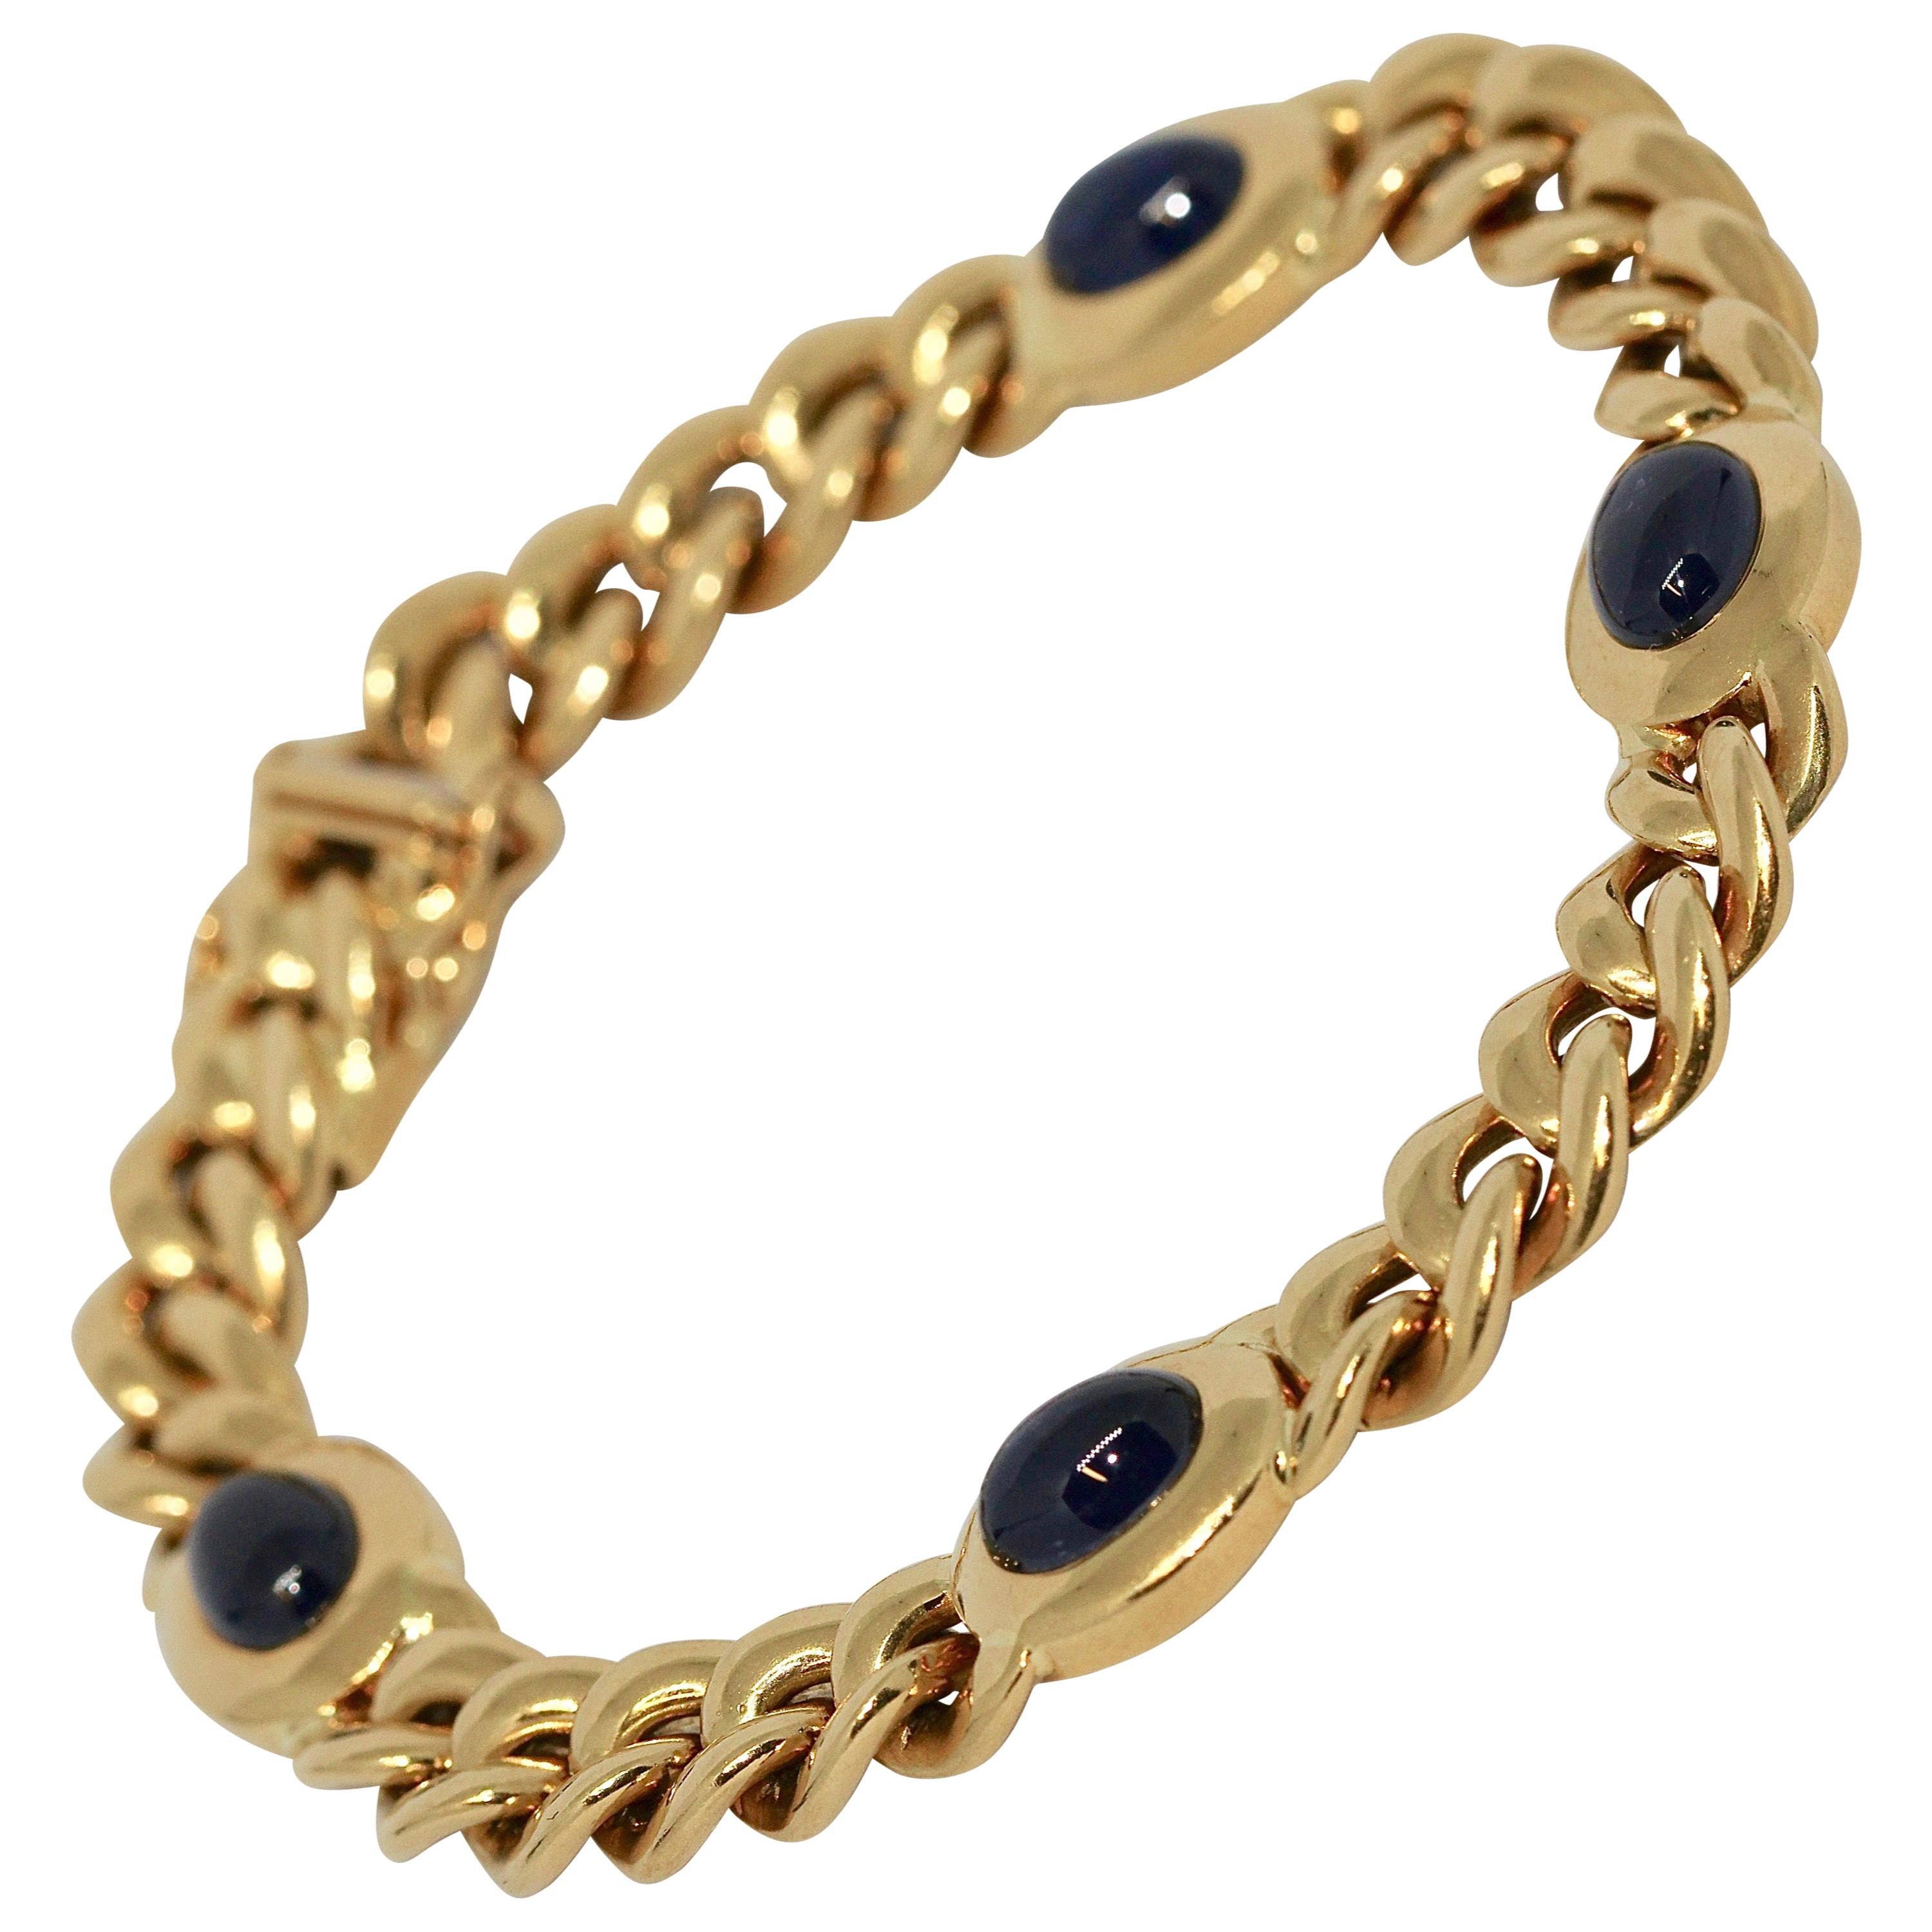 Solid 18 Karat Yellow Gold Bracelet with Four Sapphire Cabochons